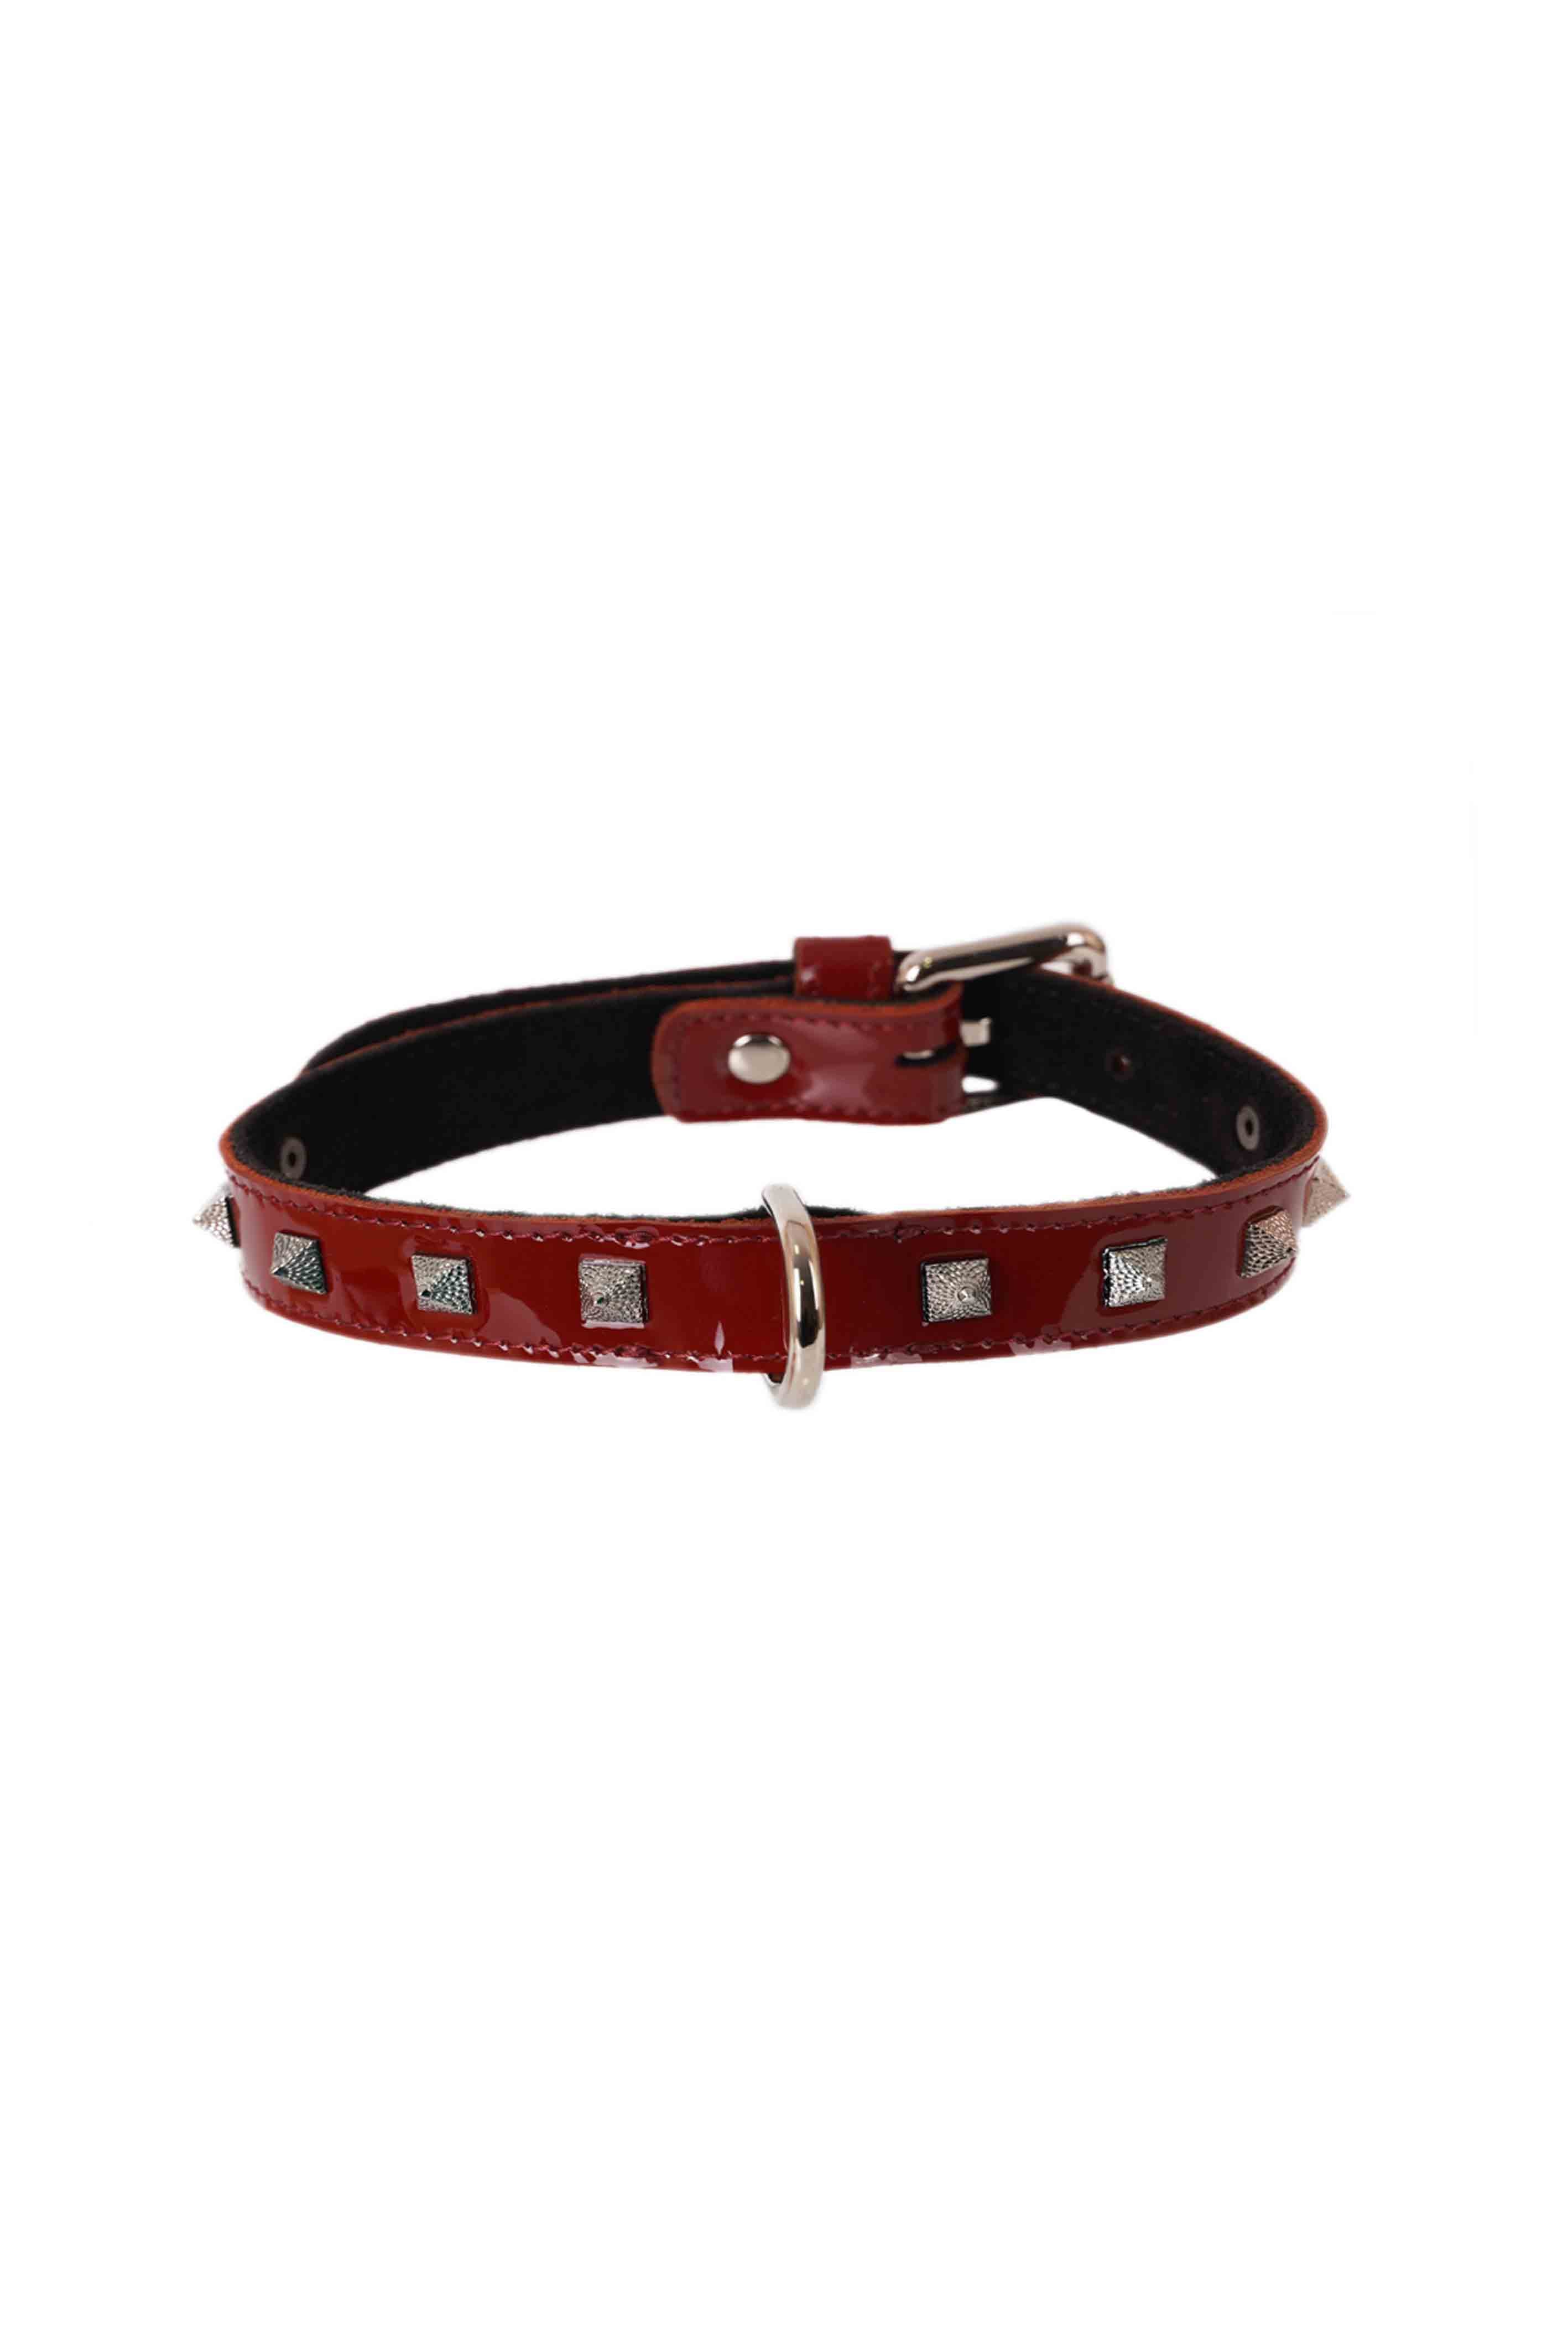 Lacquered Leather Spiked Choker. Black